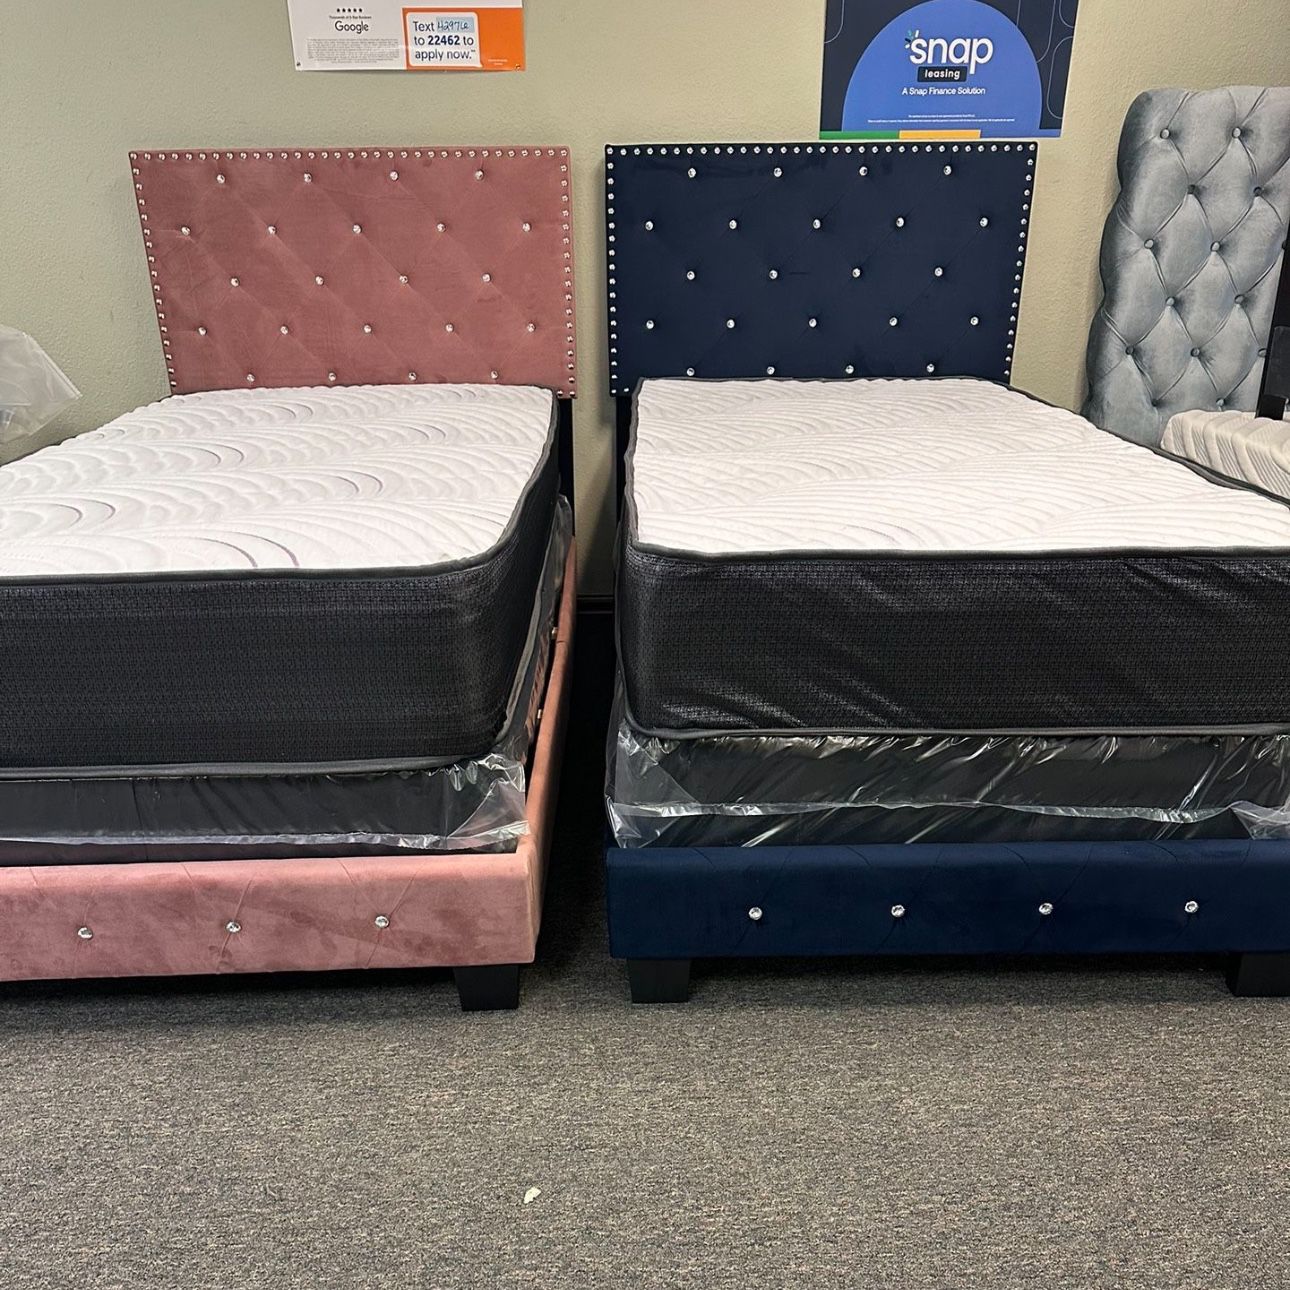 NEW TWIN FULL QUEEN KING SIZE BED WITH MATTRESS AND BOXSPRING INCLUDING FREE DELIVERY SPECIAL FINANCING IS AVAILABLE 